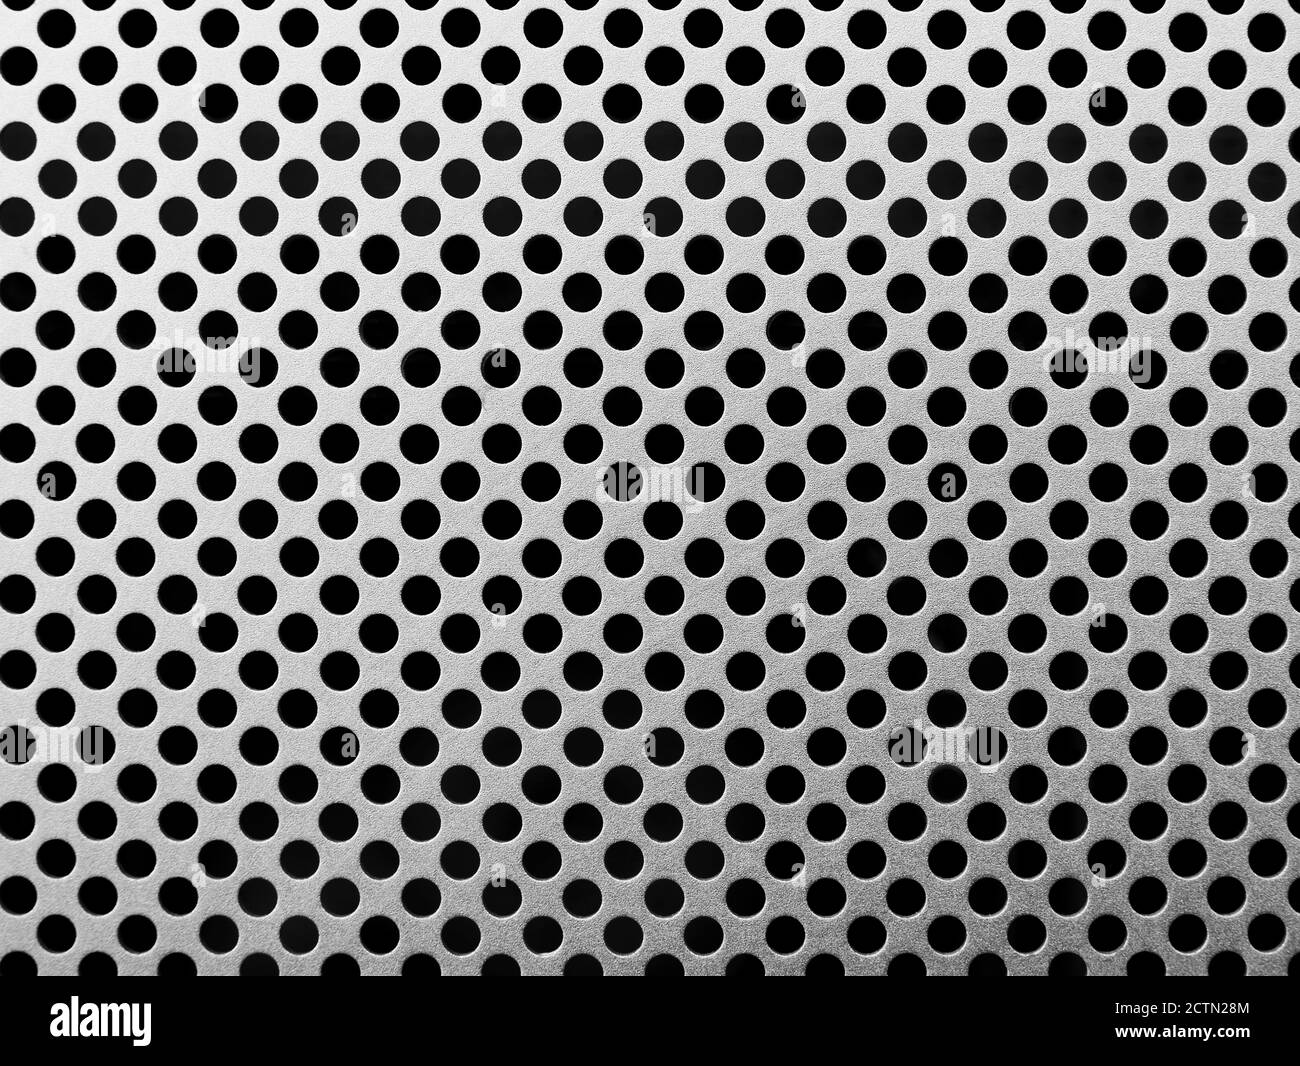 Perforated metal plate texture Stock Photo - Alamy